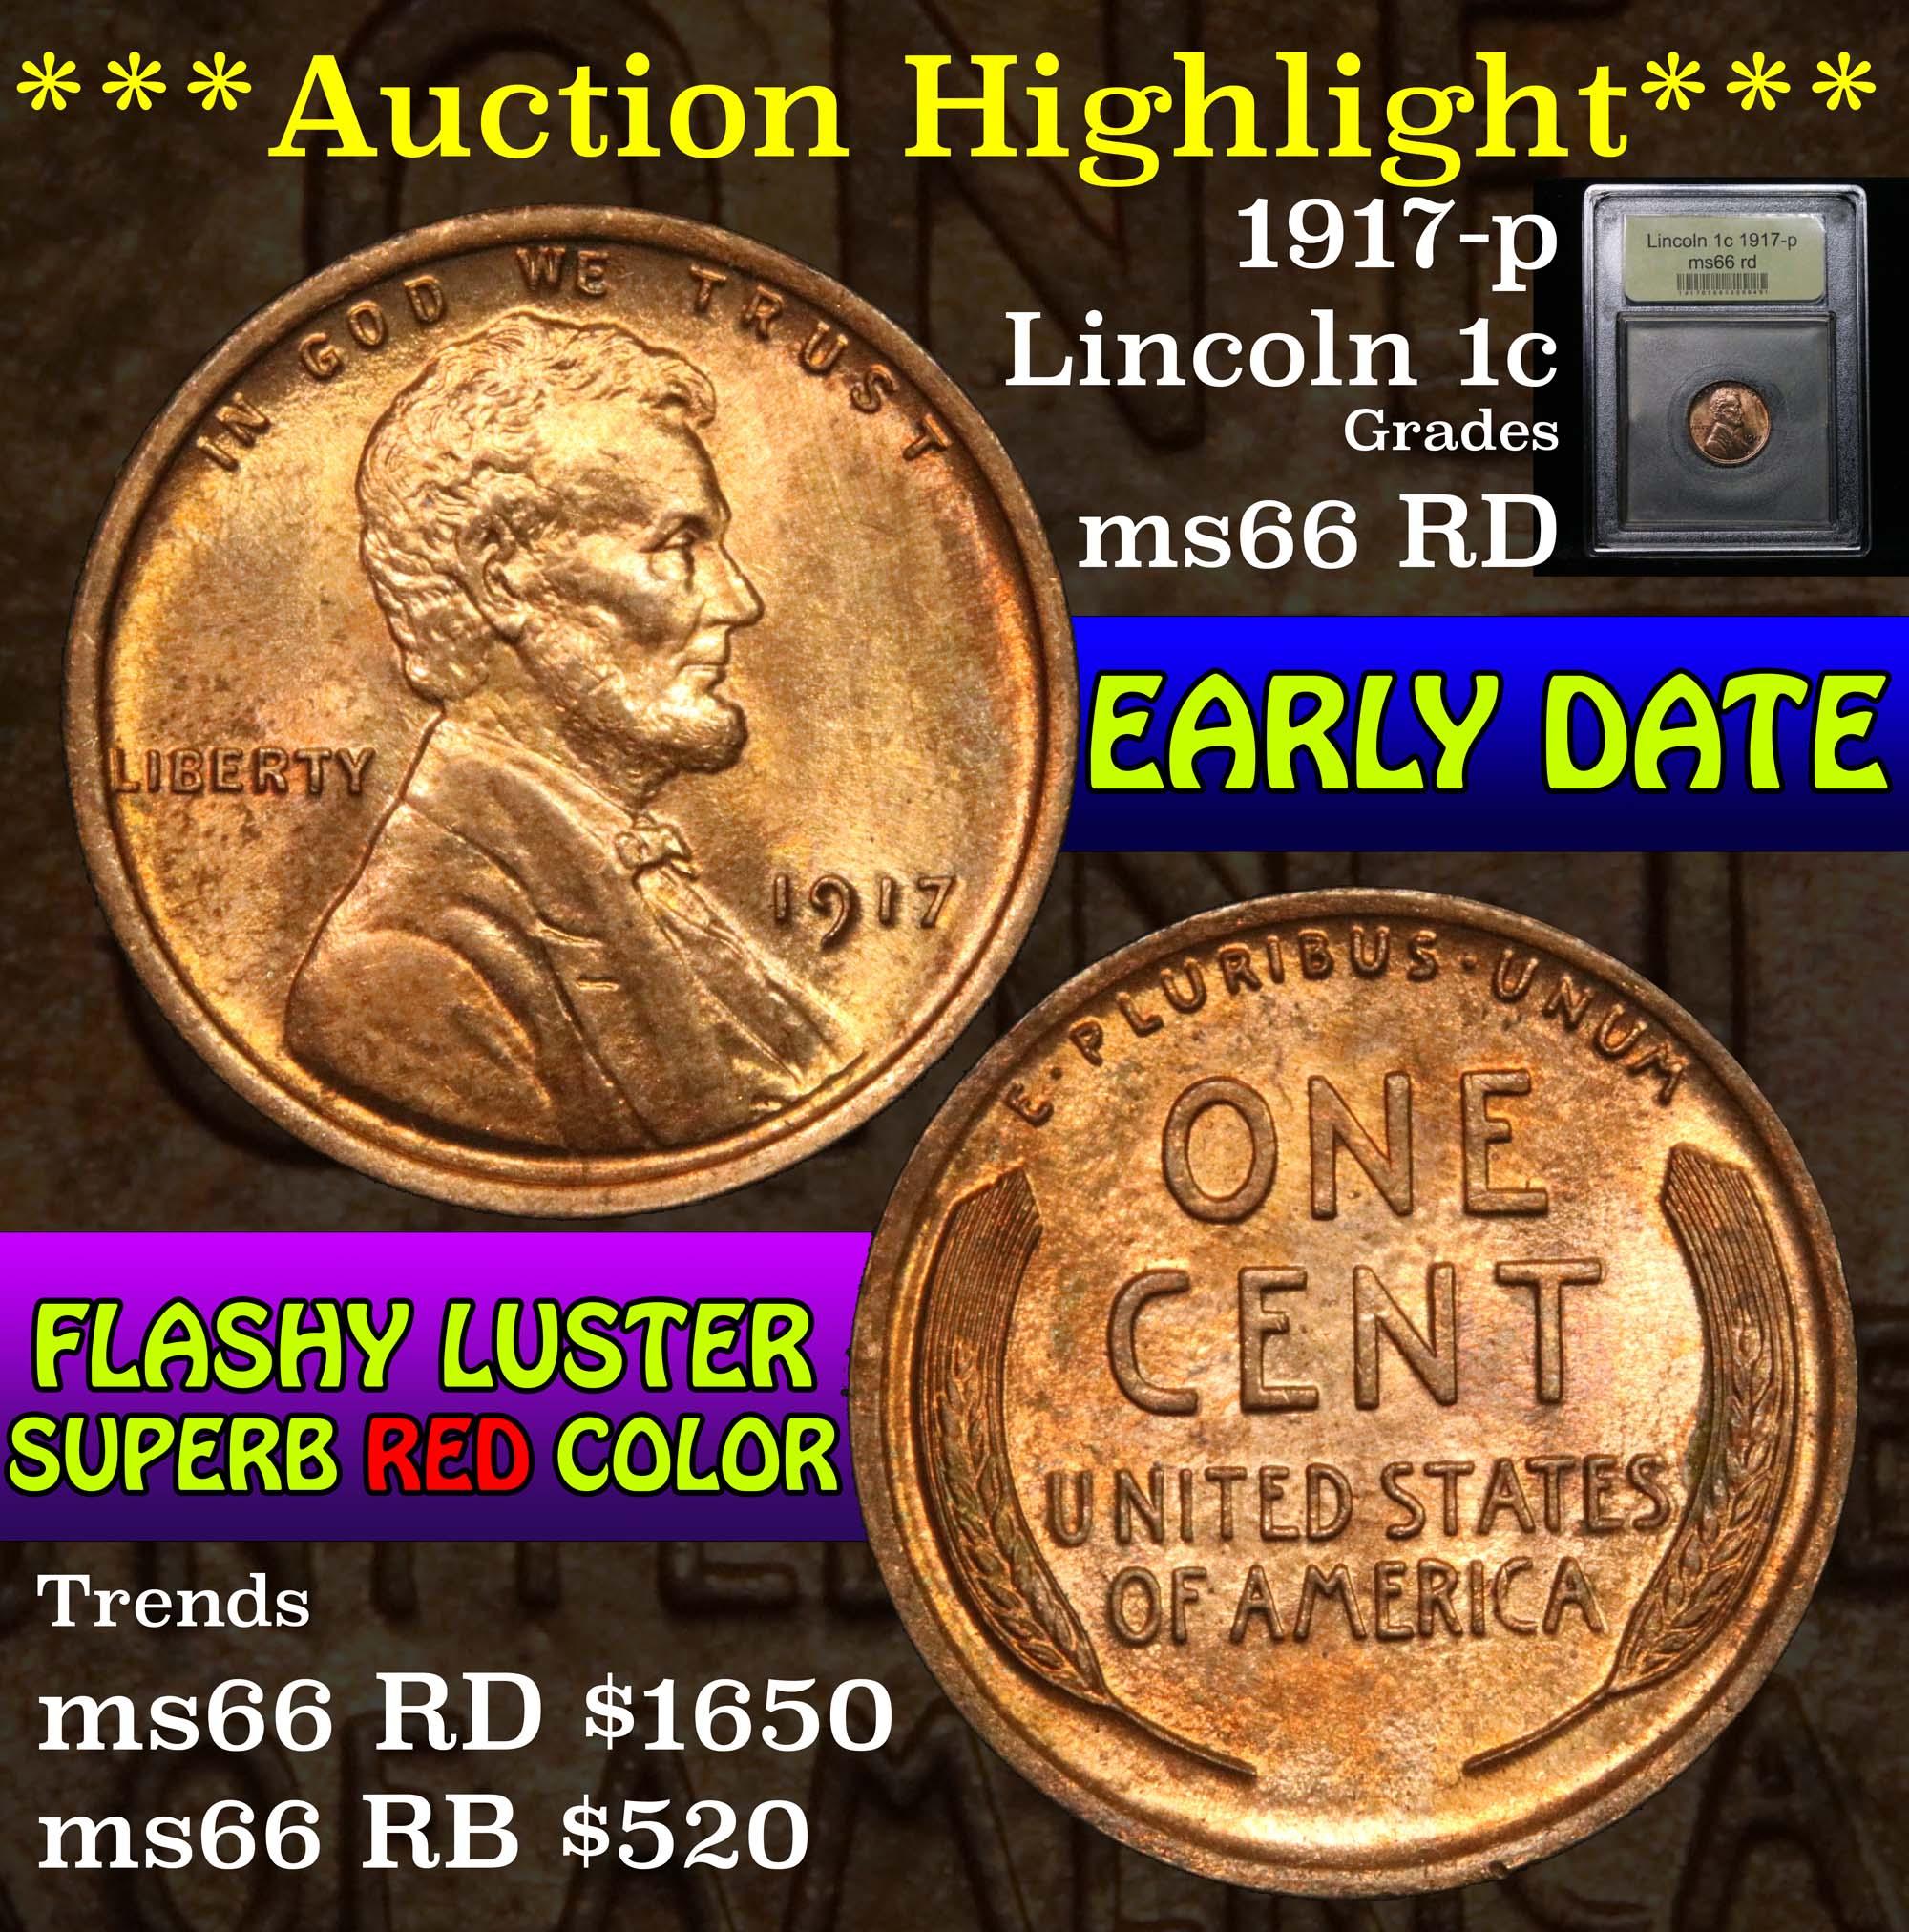 ***Auction Highlight*** 1917-p Lincoln Cent 1c Graded GEM+ Unc RD by USCG (fc)